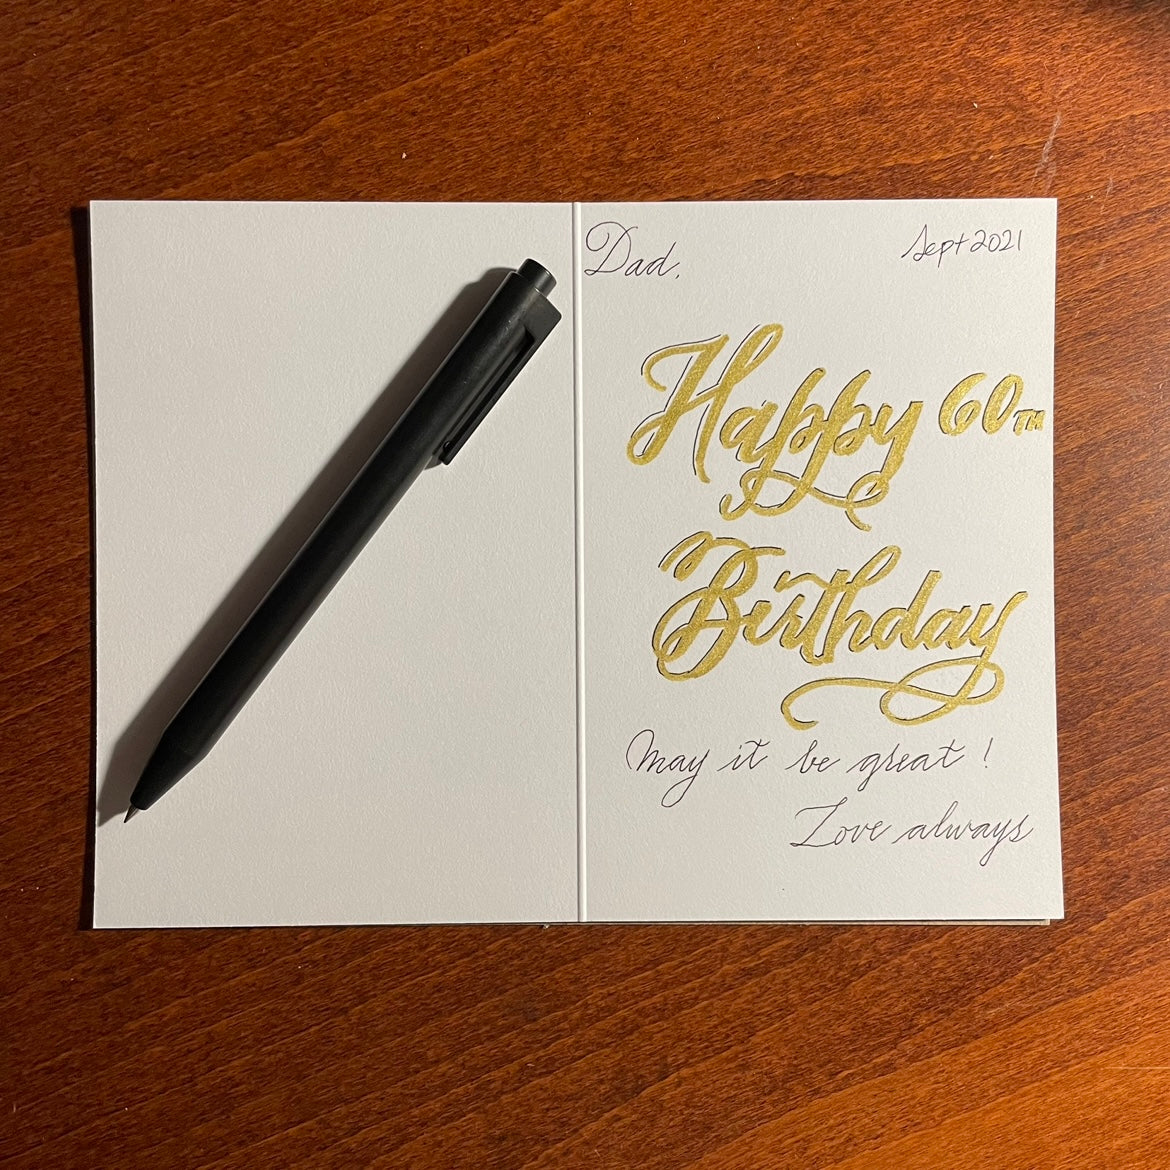 Ask for a handwritten calligraphy message on your behalf and mailed by Nibs and Scripts! | Text: "Dad, Happy 60th Birthday! May it be great! Love always"